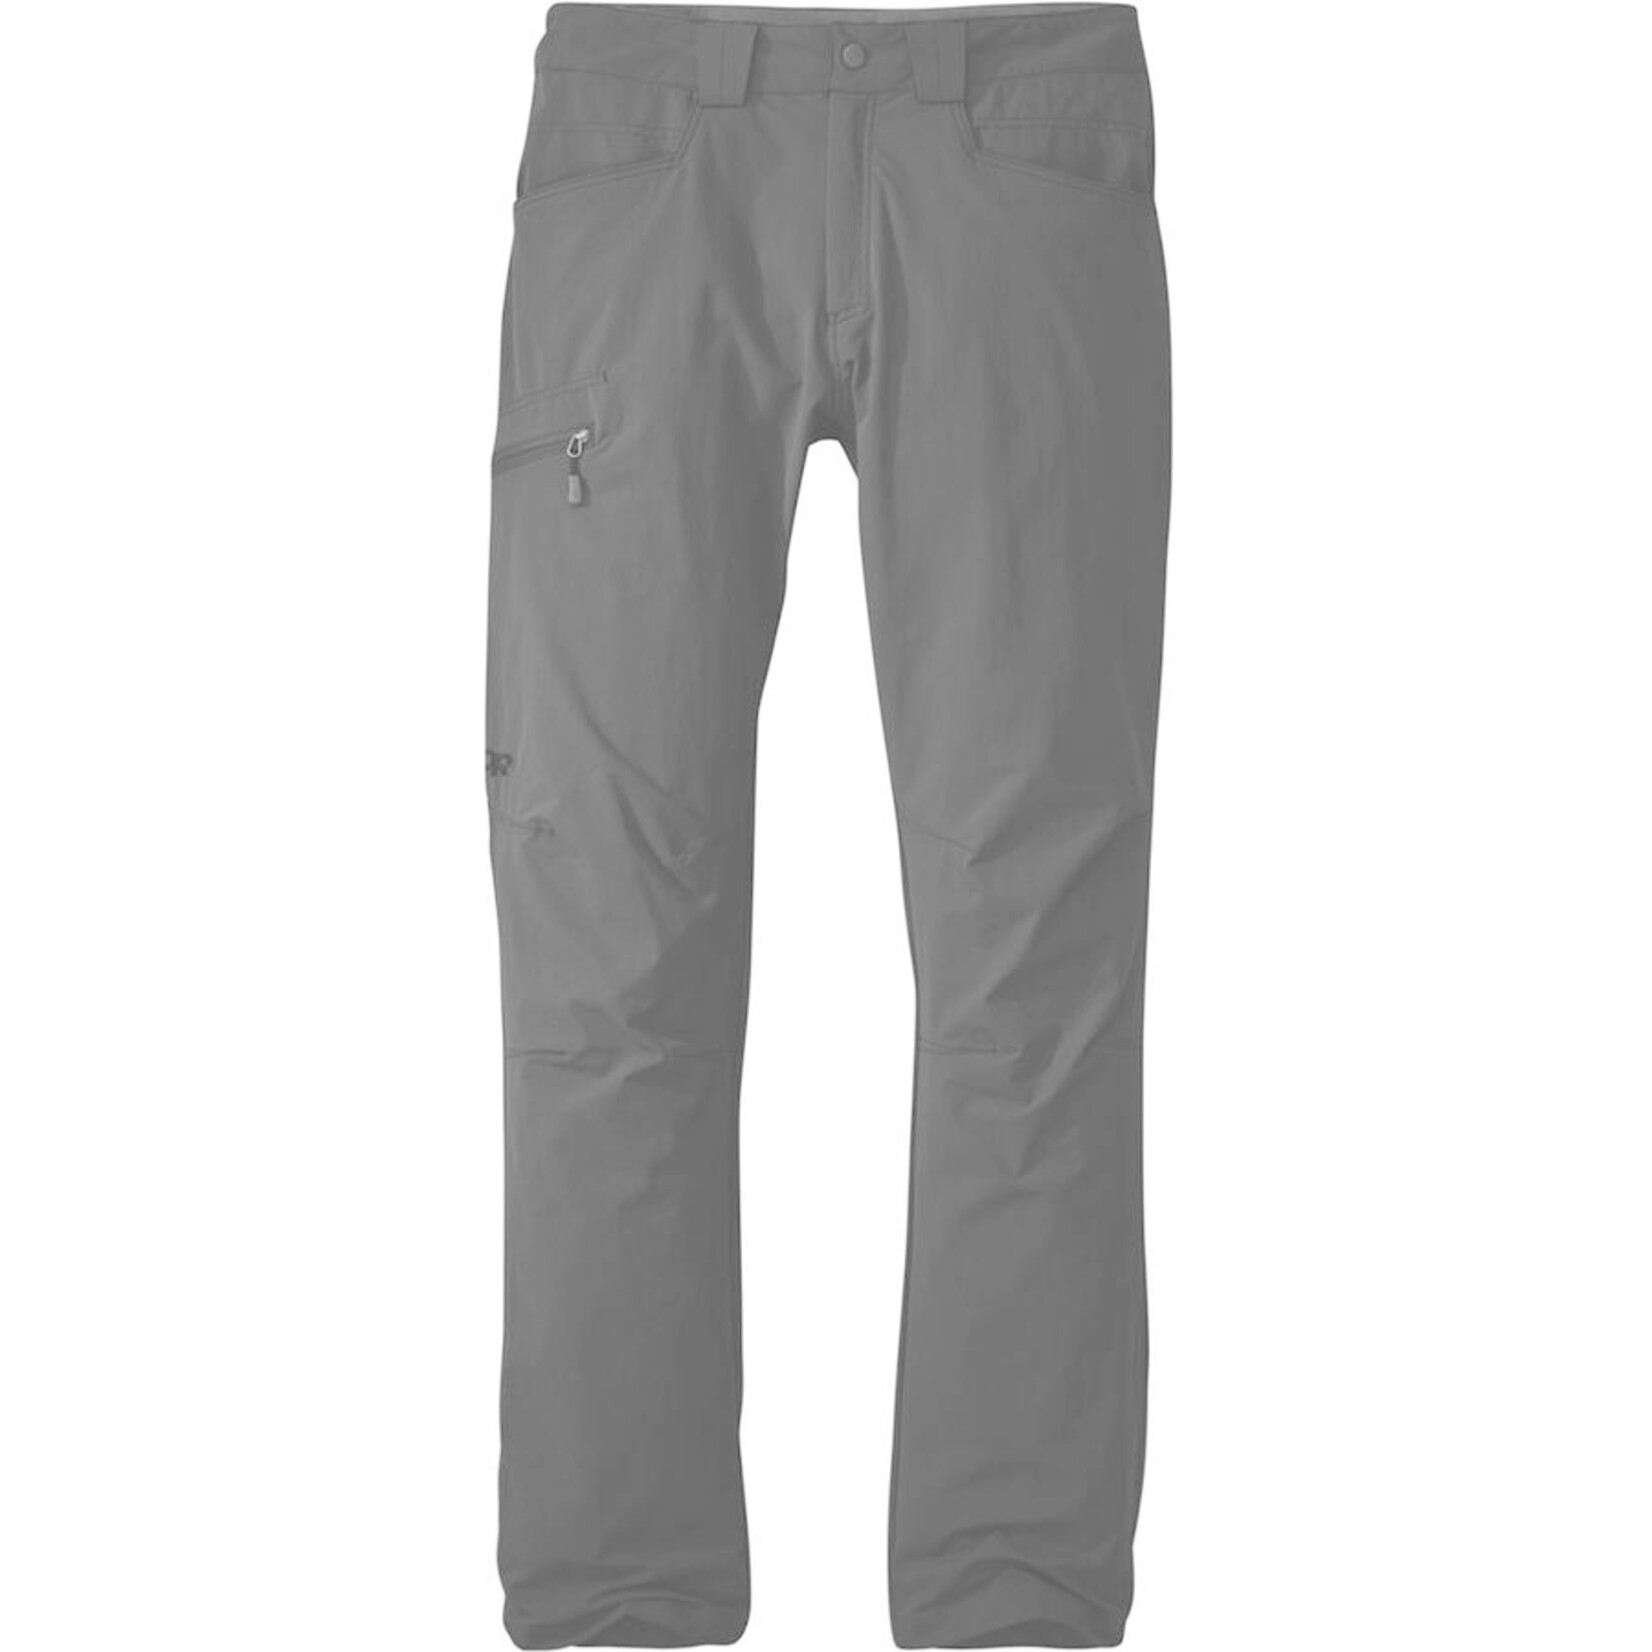 Outdoor Research Pantalons Voodoo pour hommes